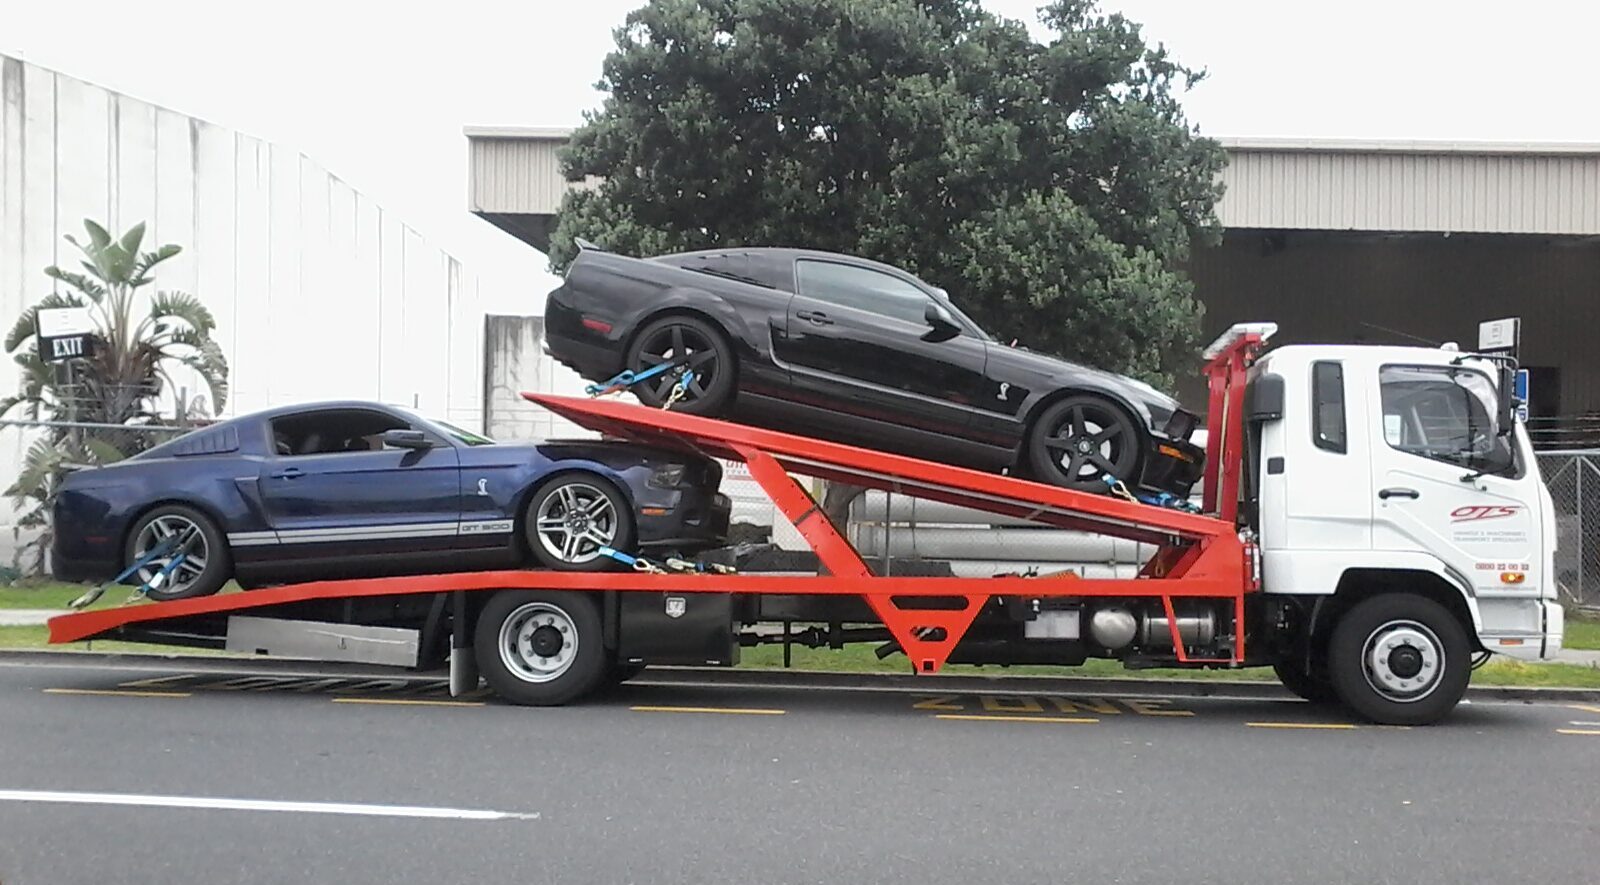 Tow Truck transporting two sport cars